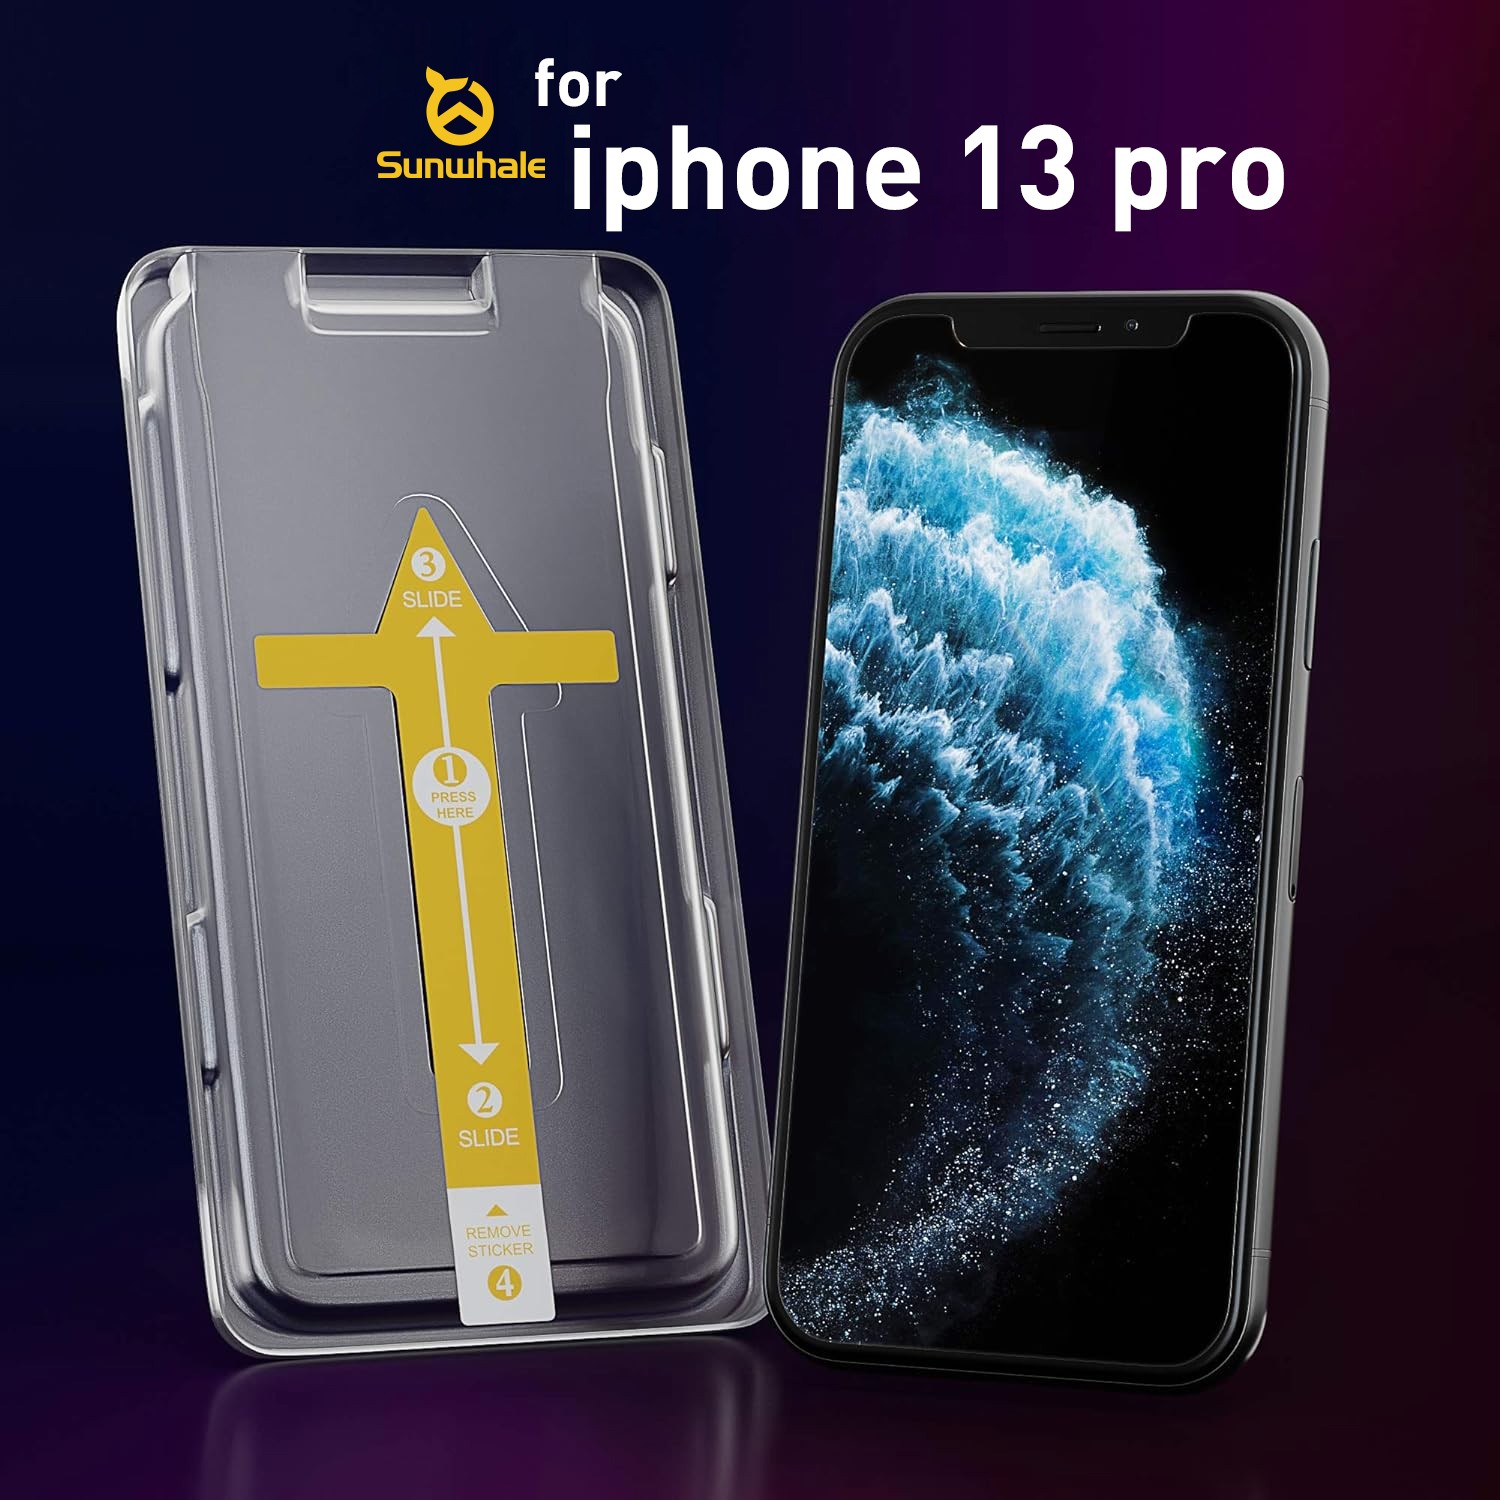 Mobile-Phone-Accessories-Sunwhale-for-iPhone-13-pro-max-Screen-Protector-Auto-Alignment-Kit-12